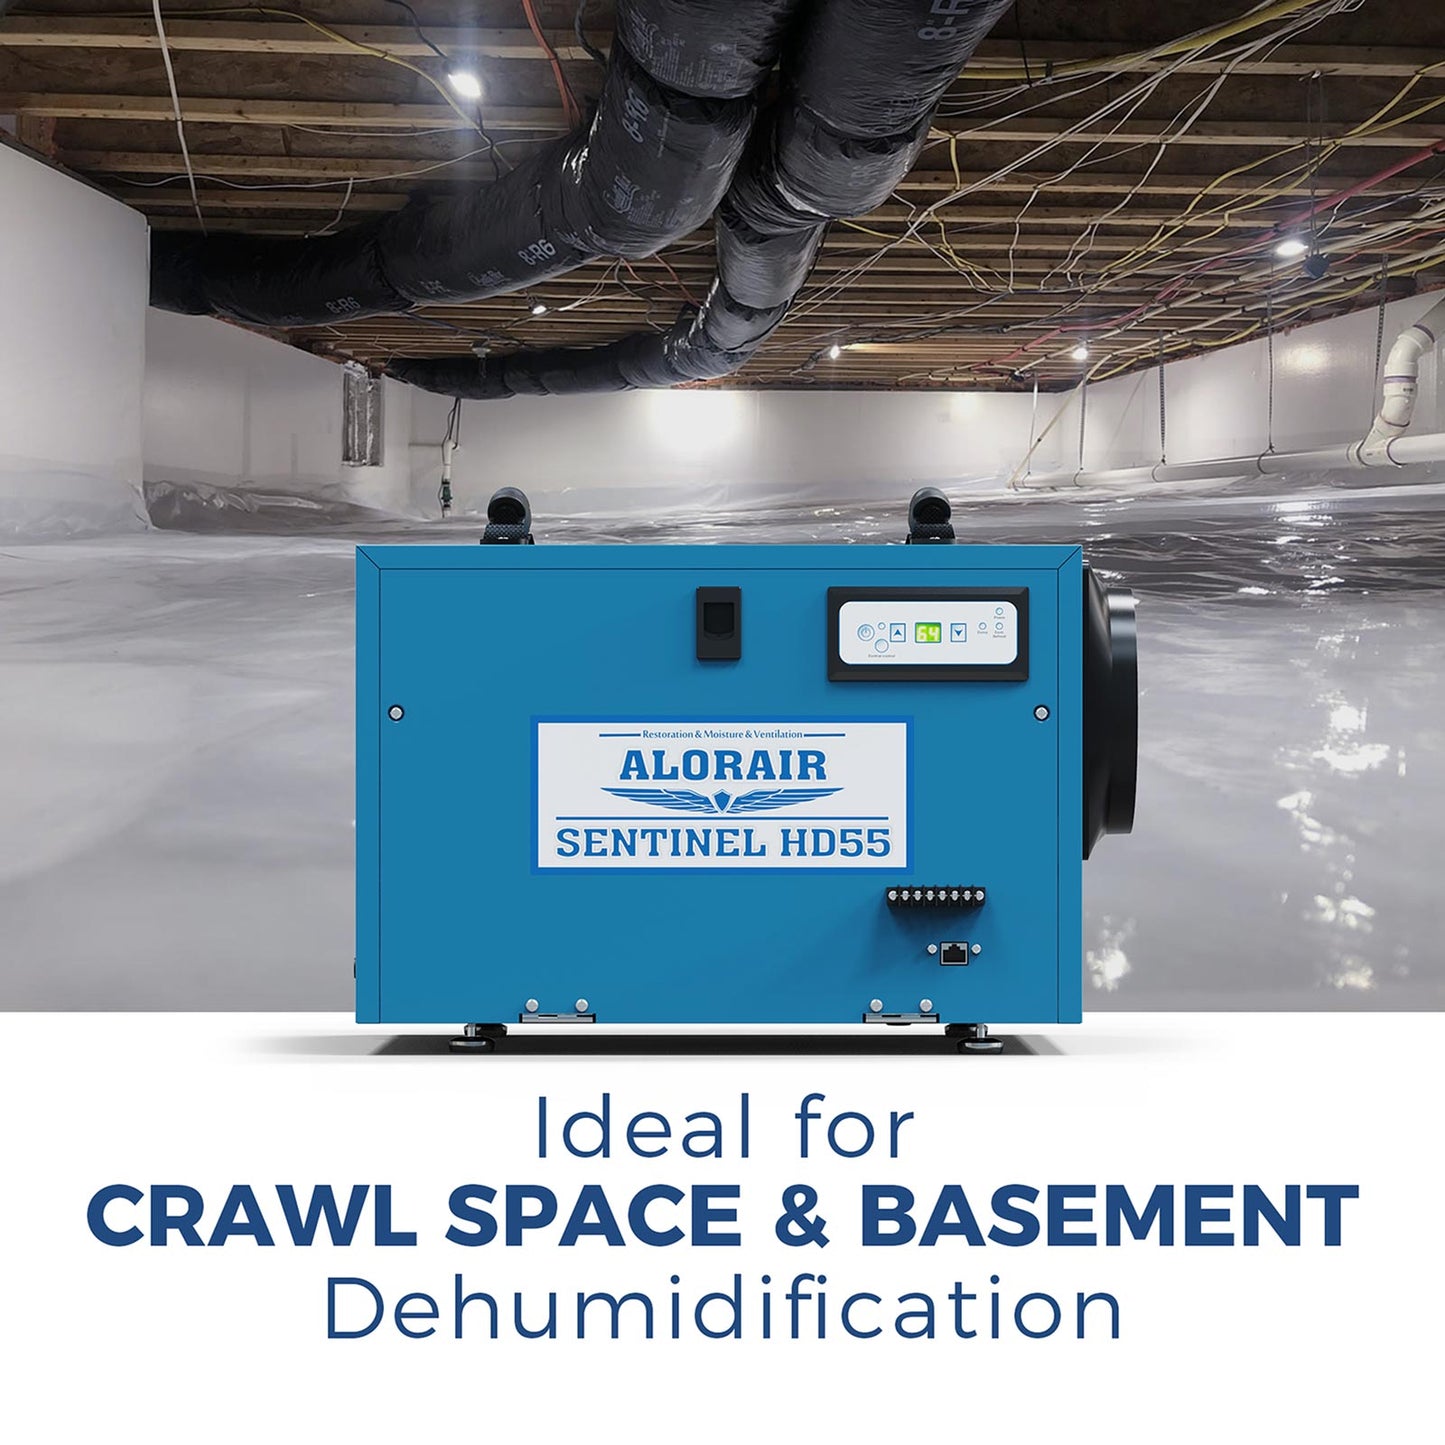 AlorAir Sentinel HD55 Commercial Dehumidifier 113 PPD, with Drain Hose for Crawl Spaces, Basements, Industry Water Damage Unit, Compact, Portable, Auto Defrost, Memory Starting, 5 Years Warranty AlorAir